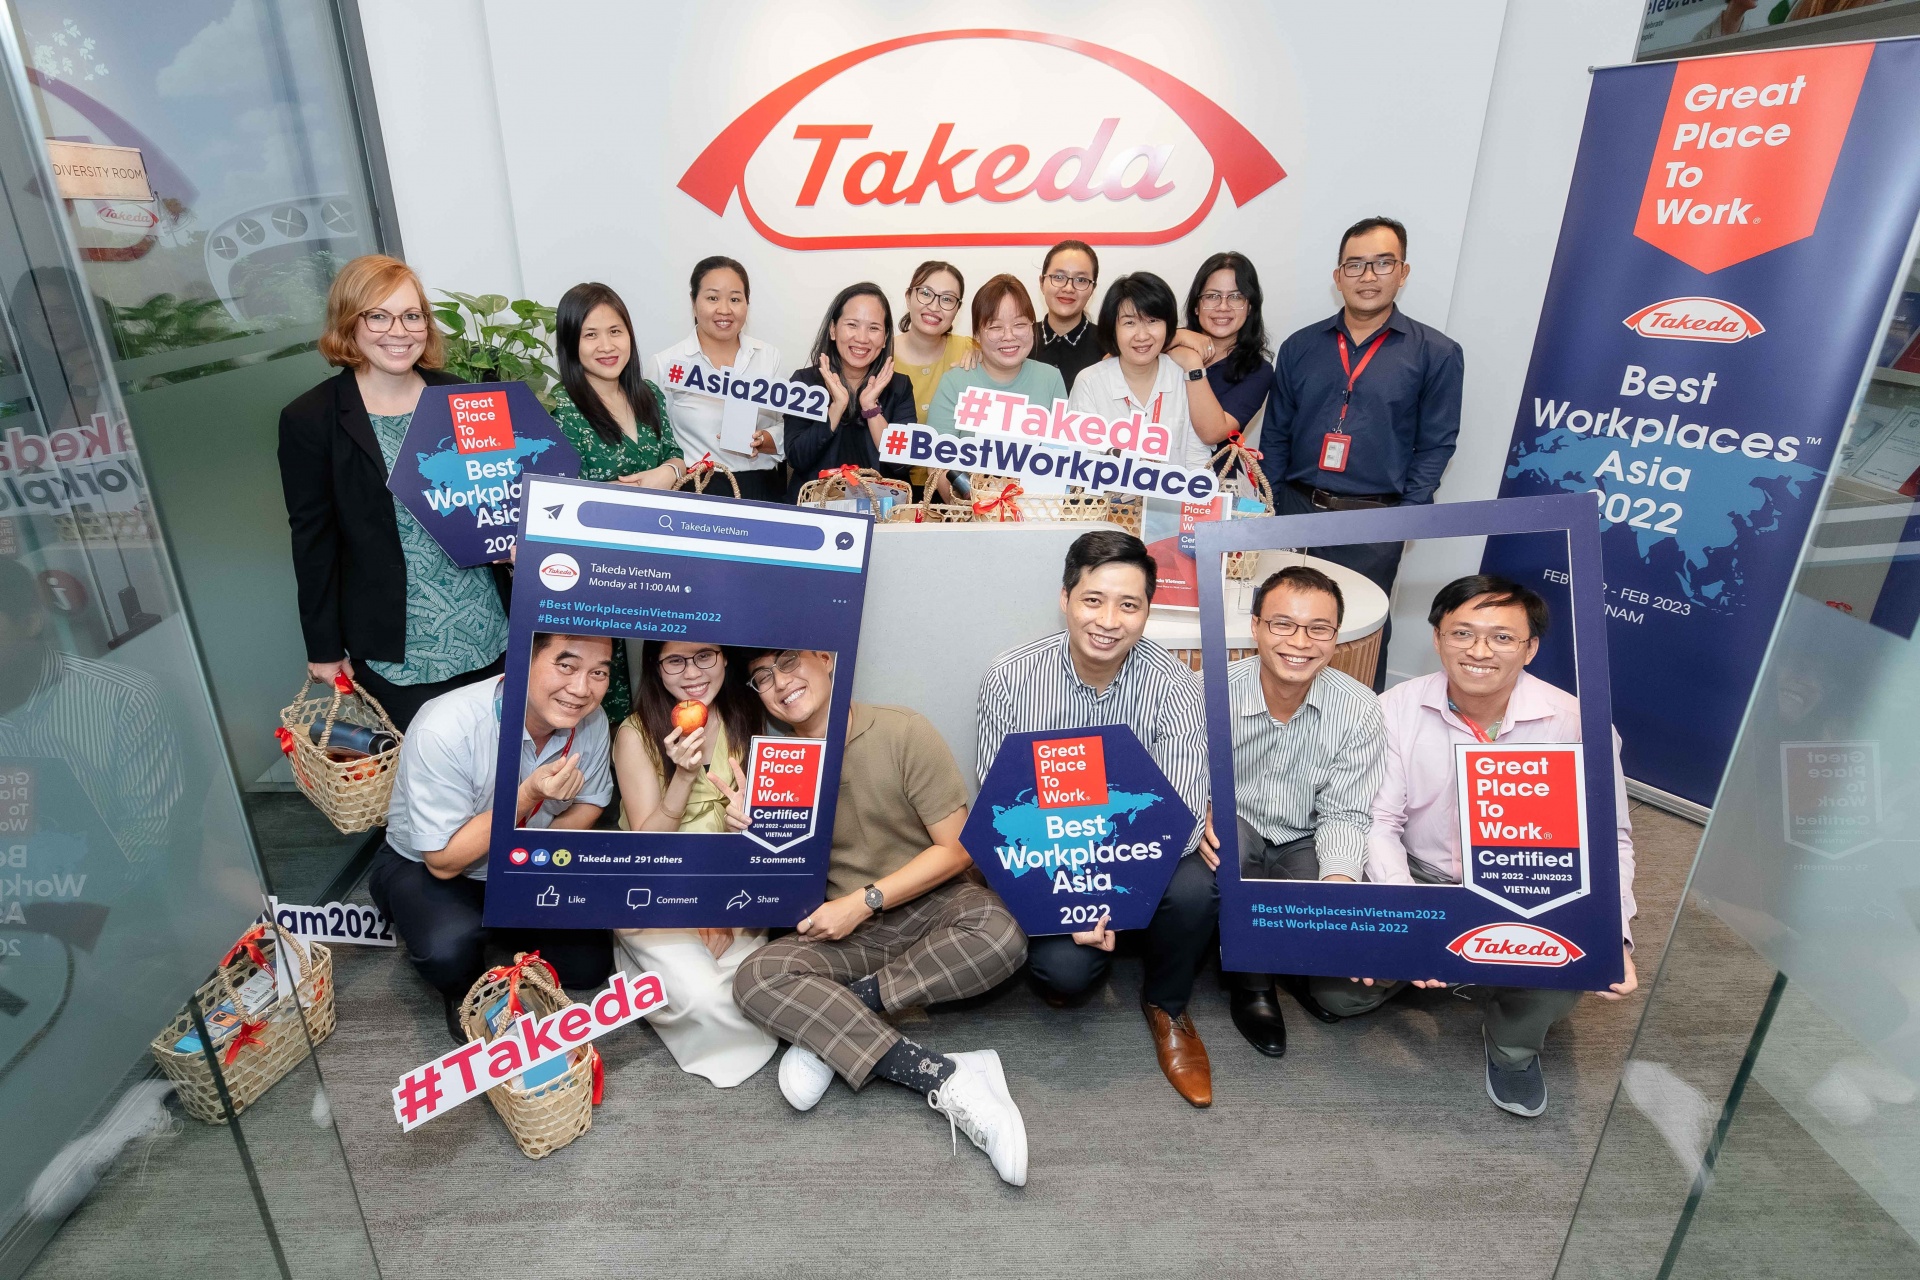 Takeda Vietnam wins Best Workplace in Asia 2022 award by Great Place to Work